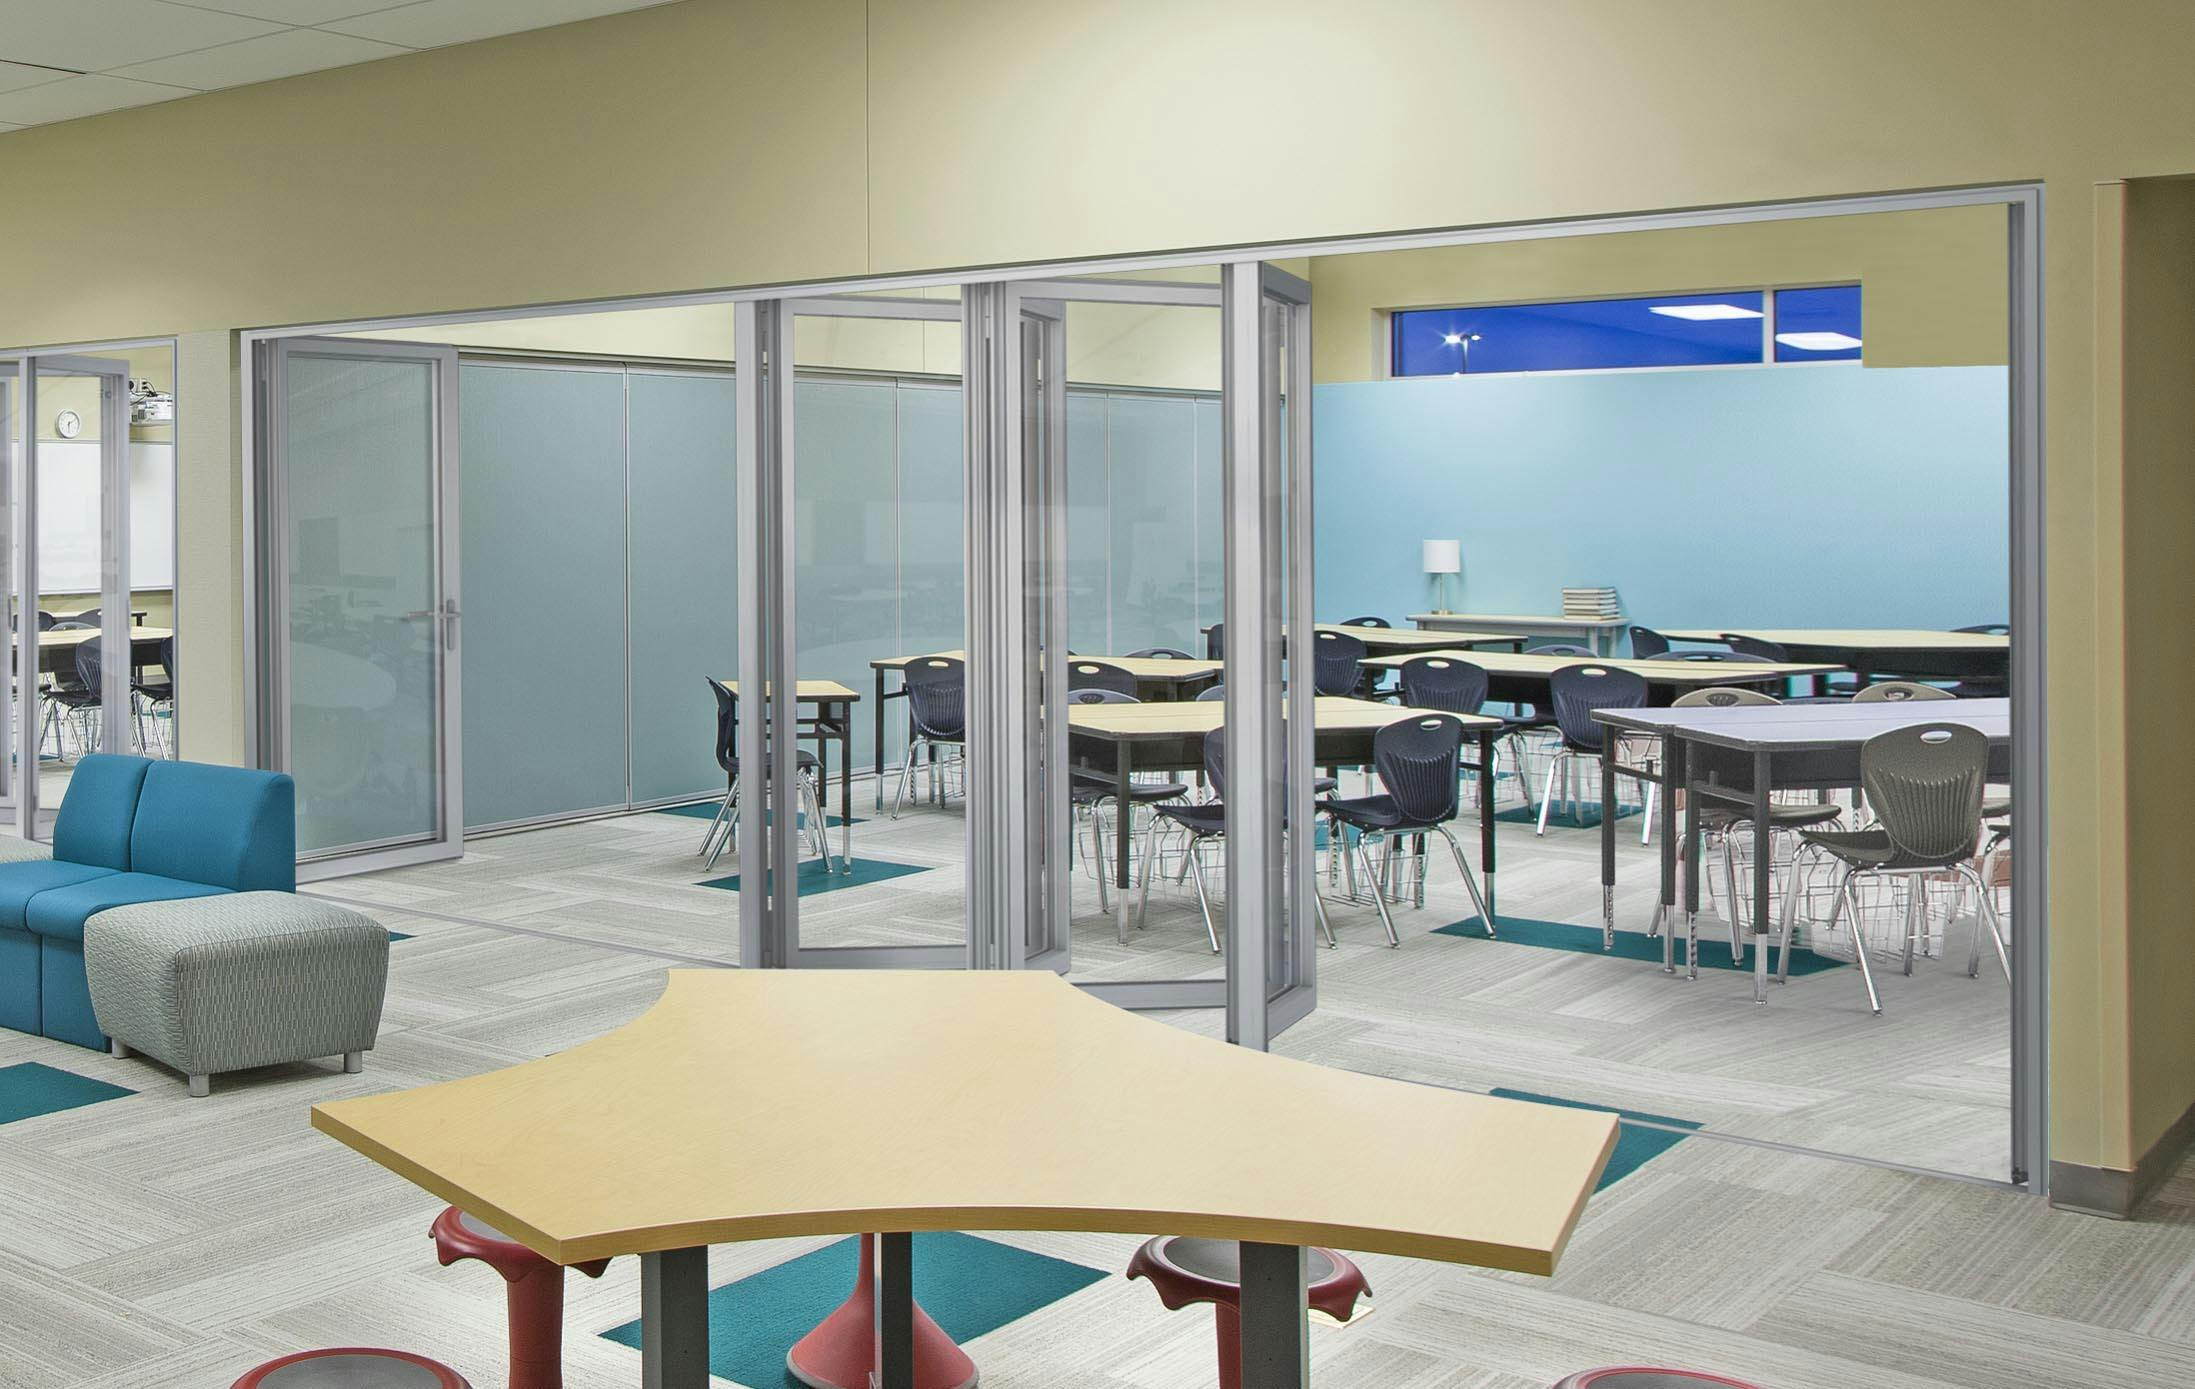 NW Acoustical 645 folding glass wall system